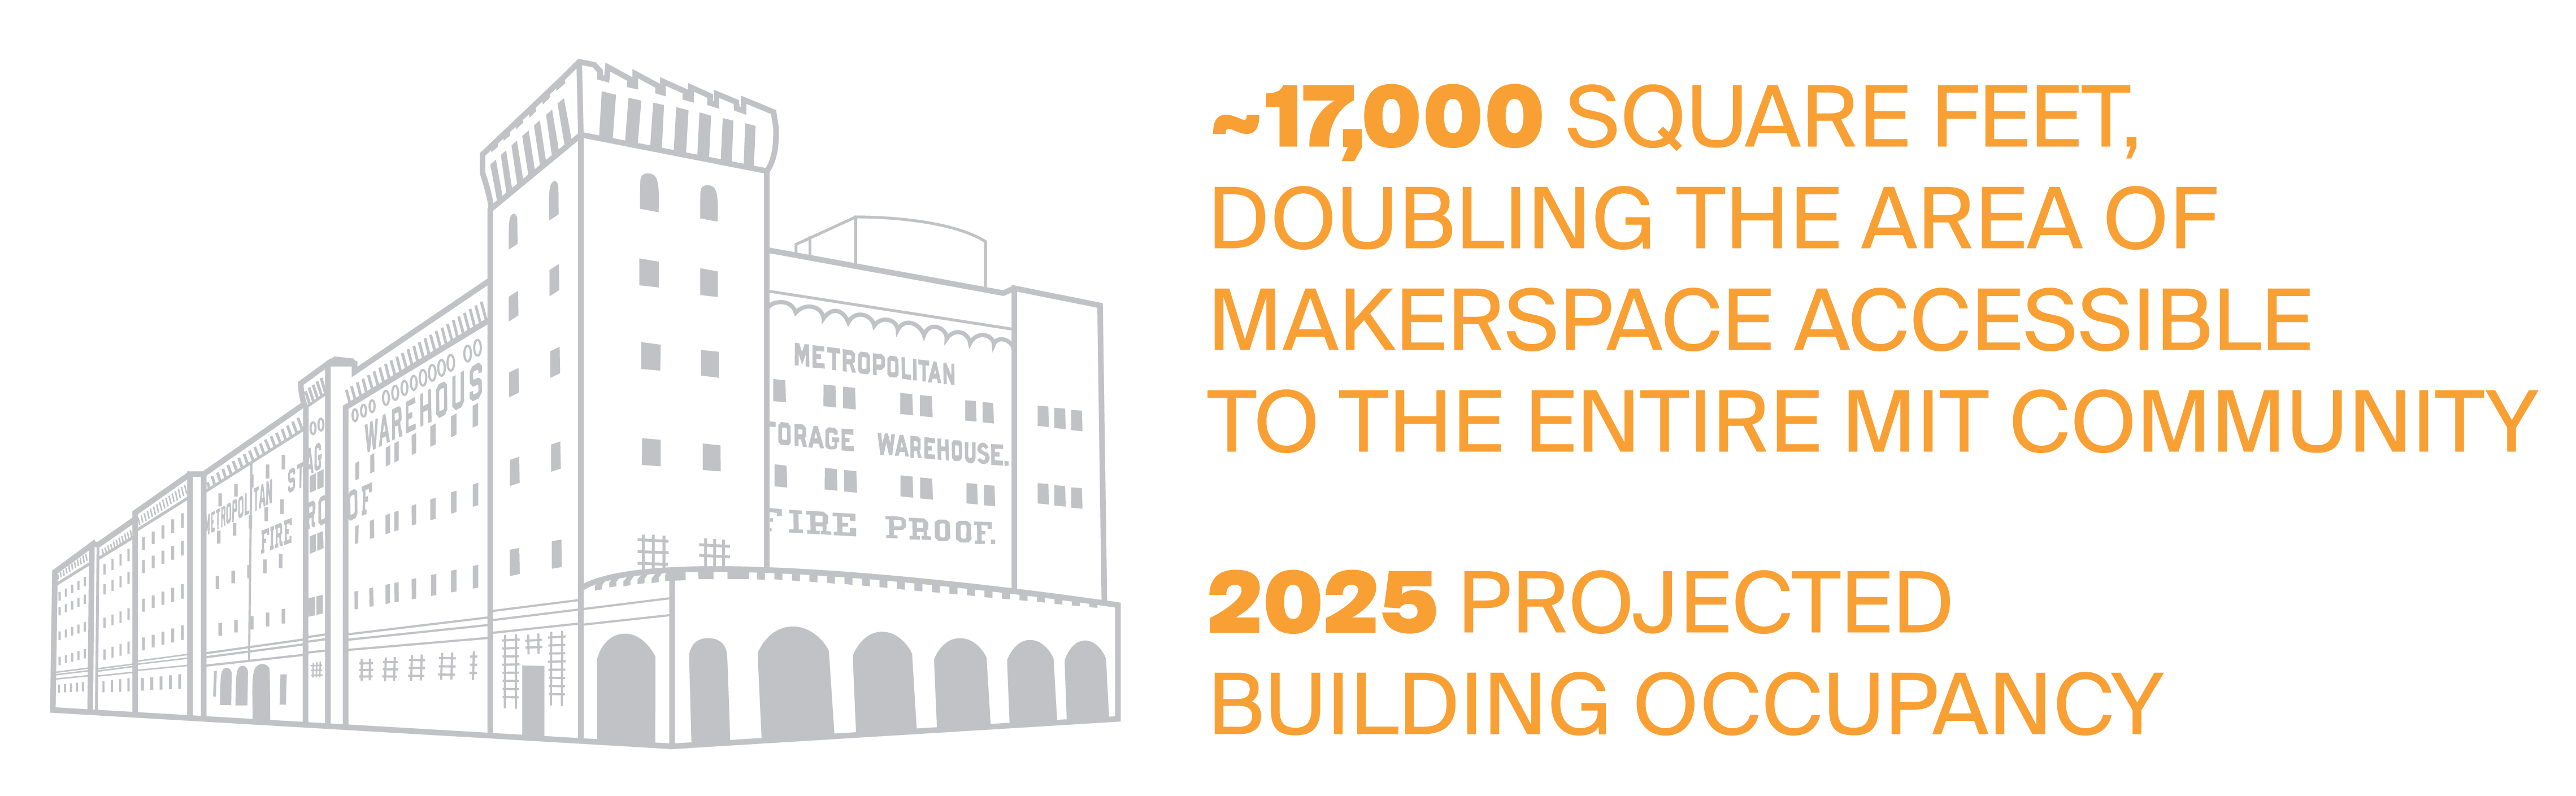 ~17,000 square feet, doubling the area of makerspace accessible to the entire MIT community; 2022 projectedbuilding occupancy